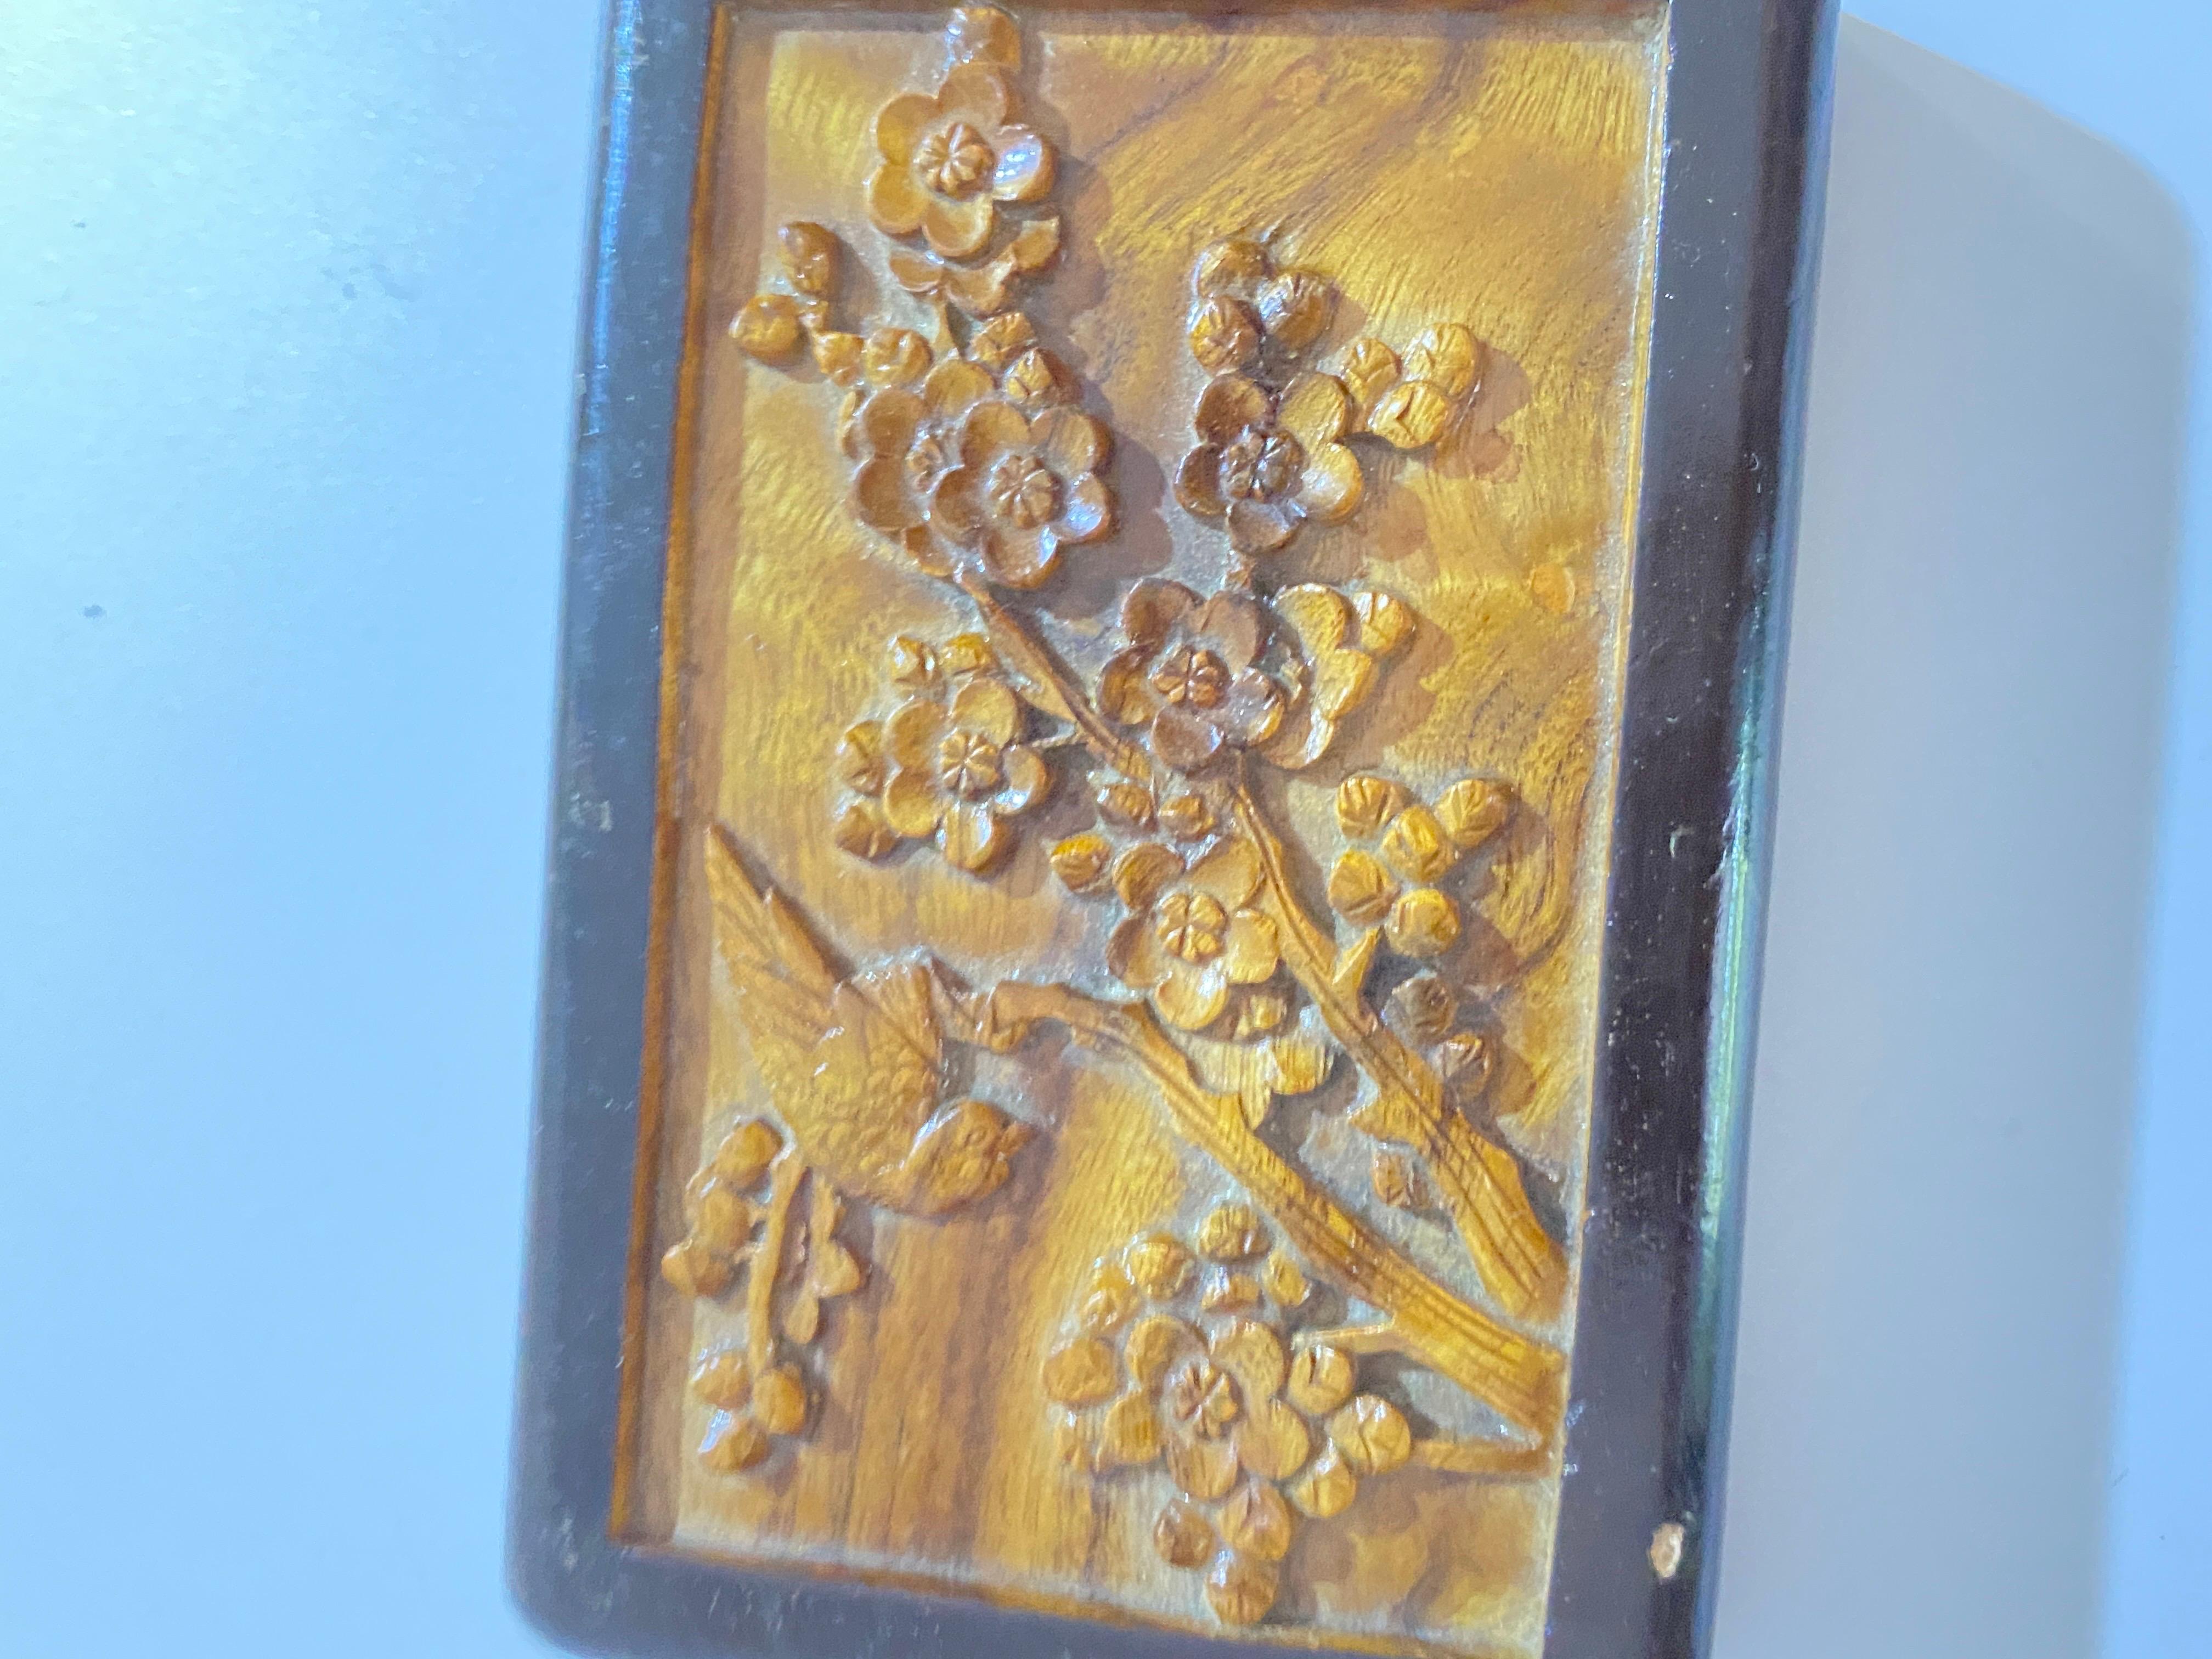 It is a carved wooden box, brown and black. One part is hand carved, the other Painted lacquered. It was made in China during the 1930s and 1940s, so it is from the Republic period.